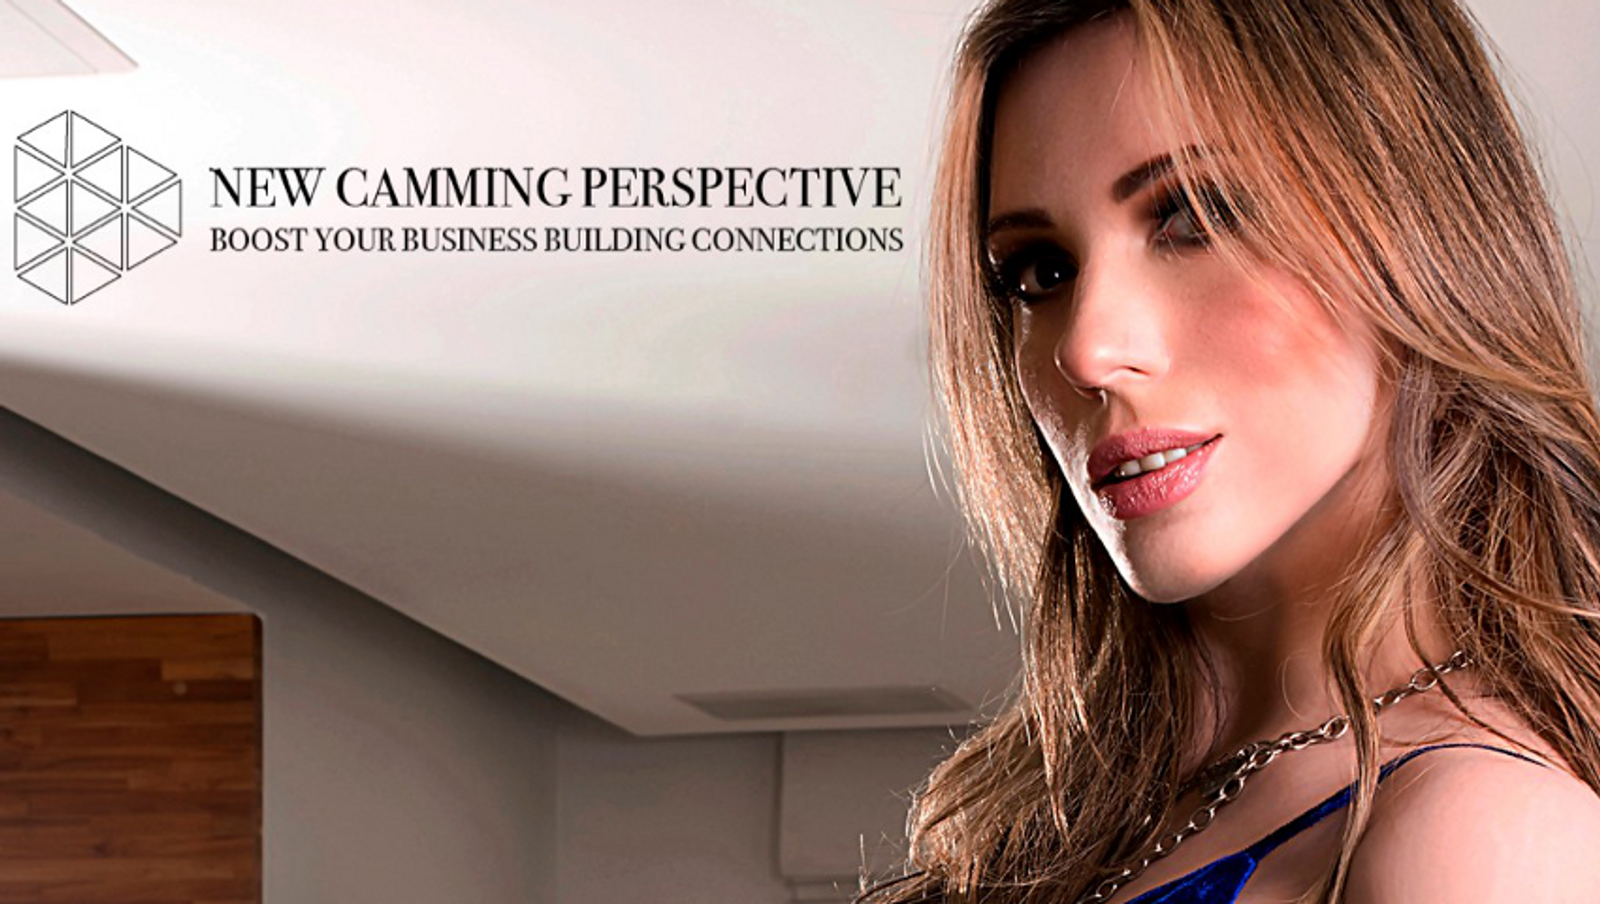 Priscila Magossi: What Kind of Camming is for You?